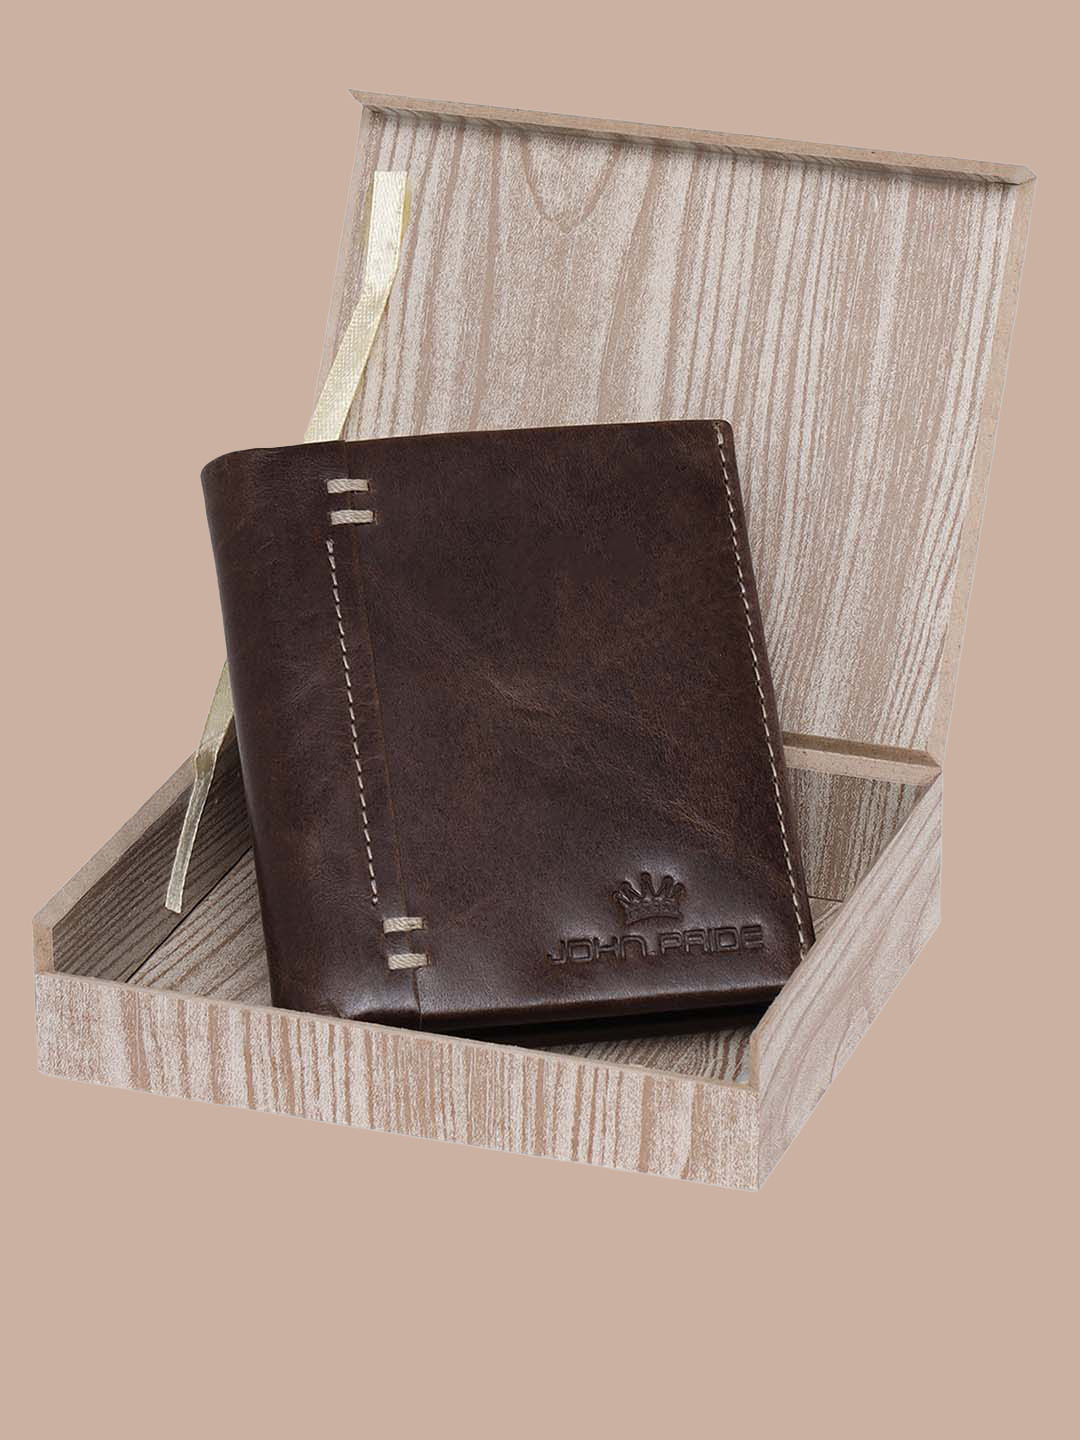 Coffee Brown Leather Wallet